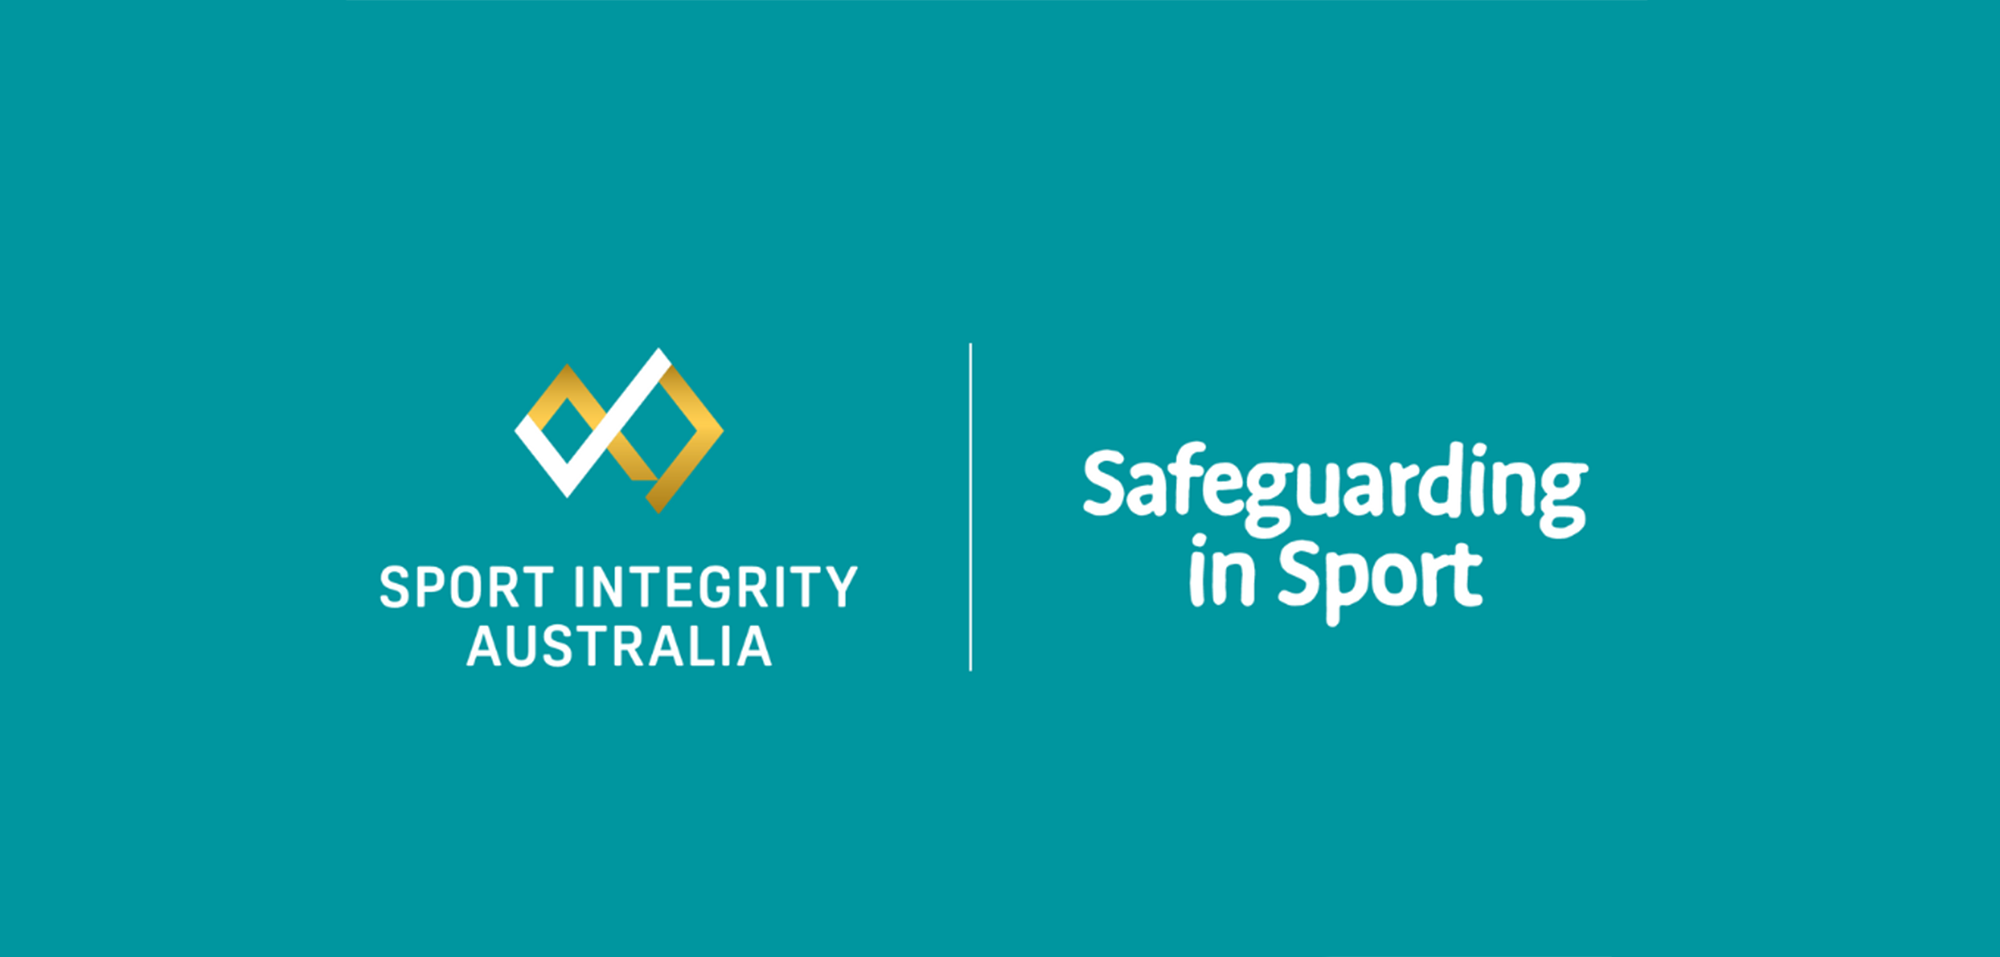 sport integrity australia launches new educational series